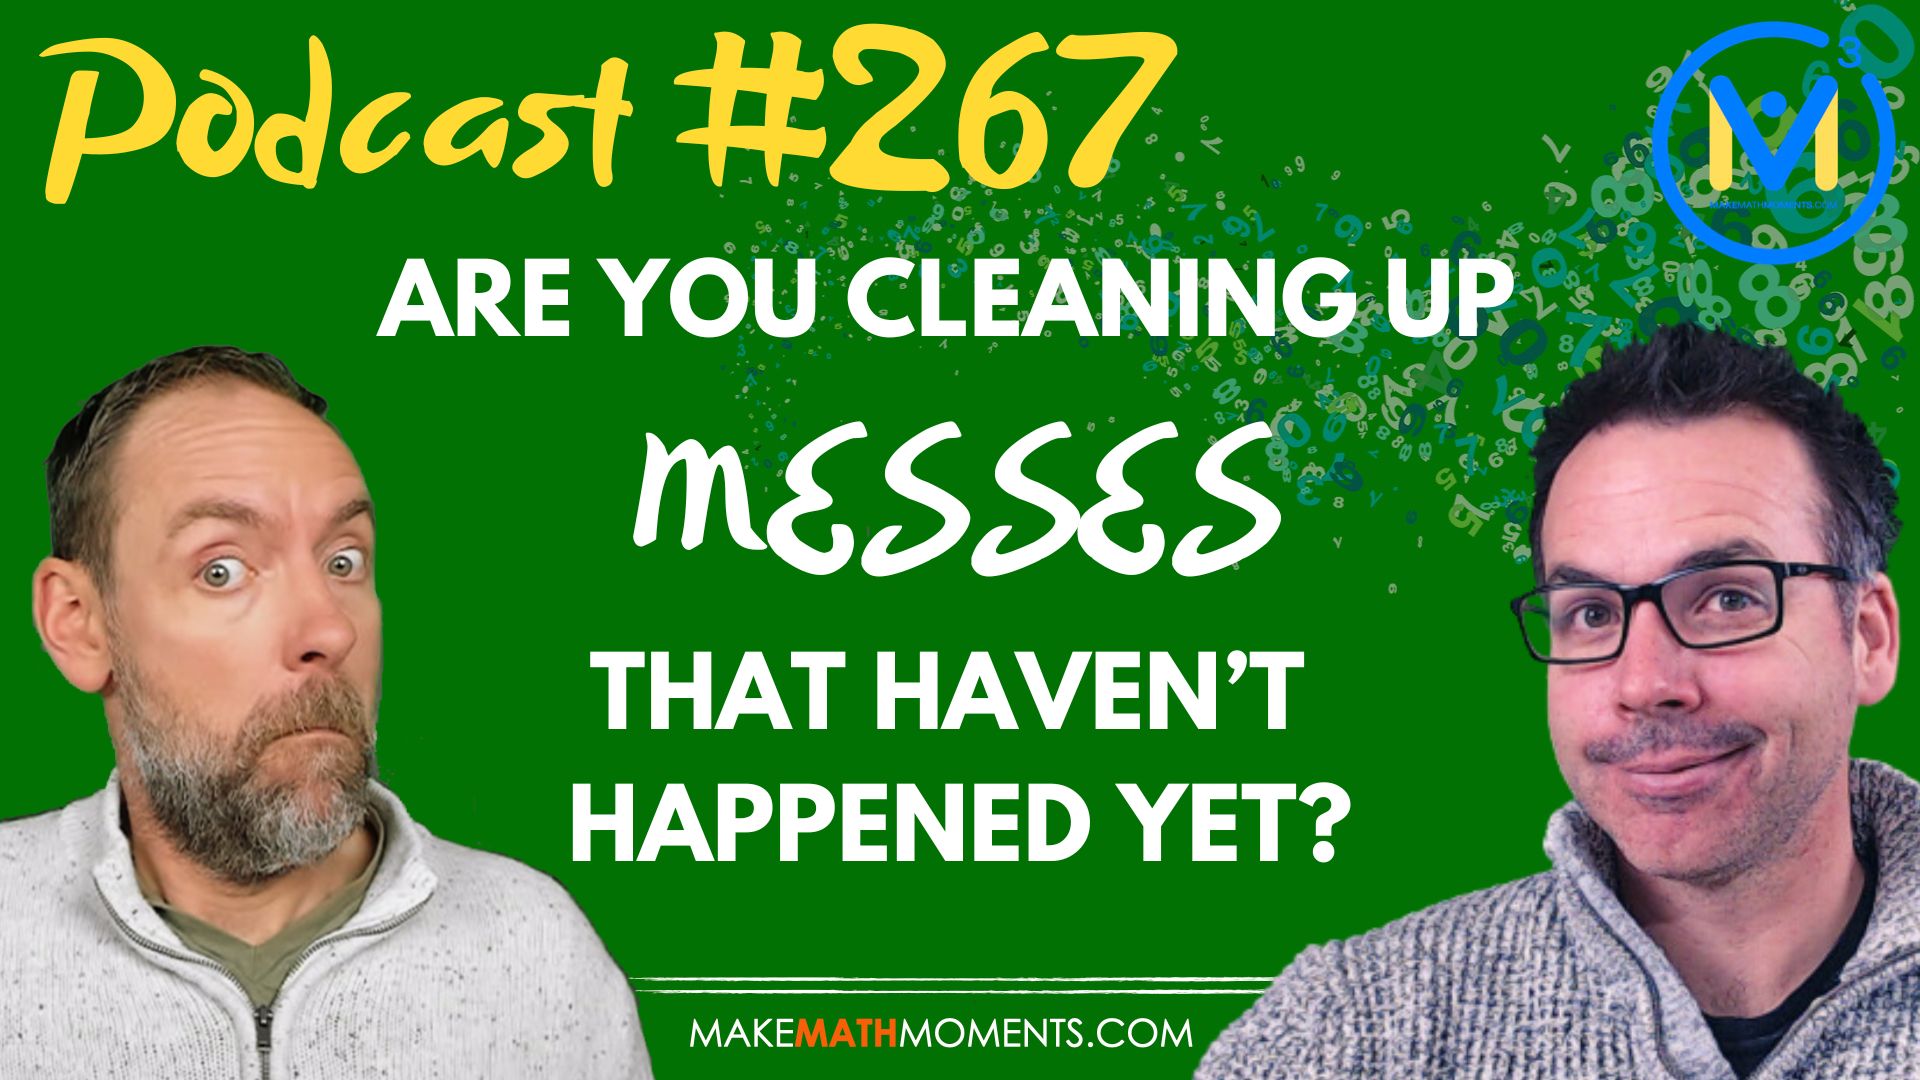 Episode #267: Are You Cleaning Up Messes That Haven’t Happened Yet? – A Math Mentoring Moment